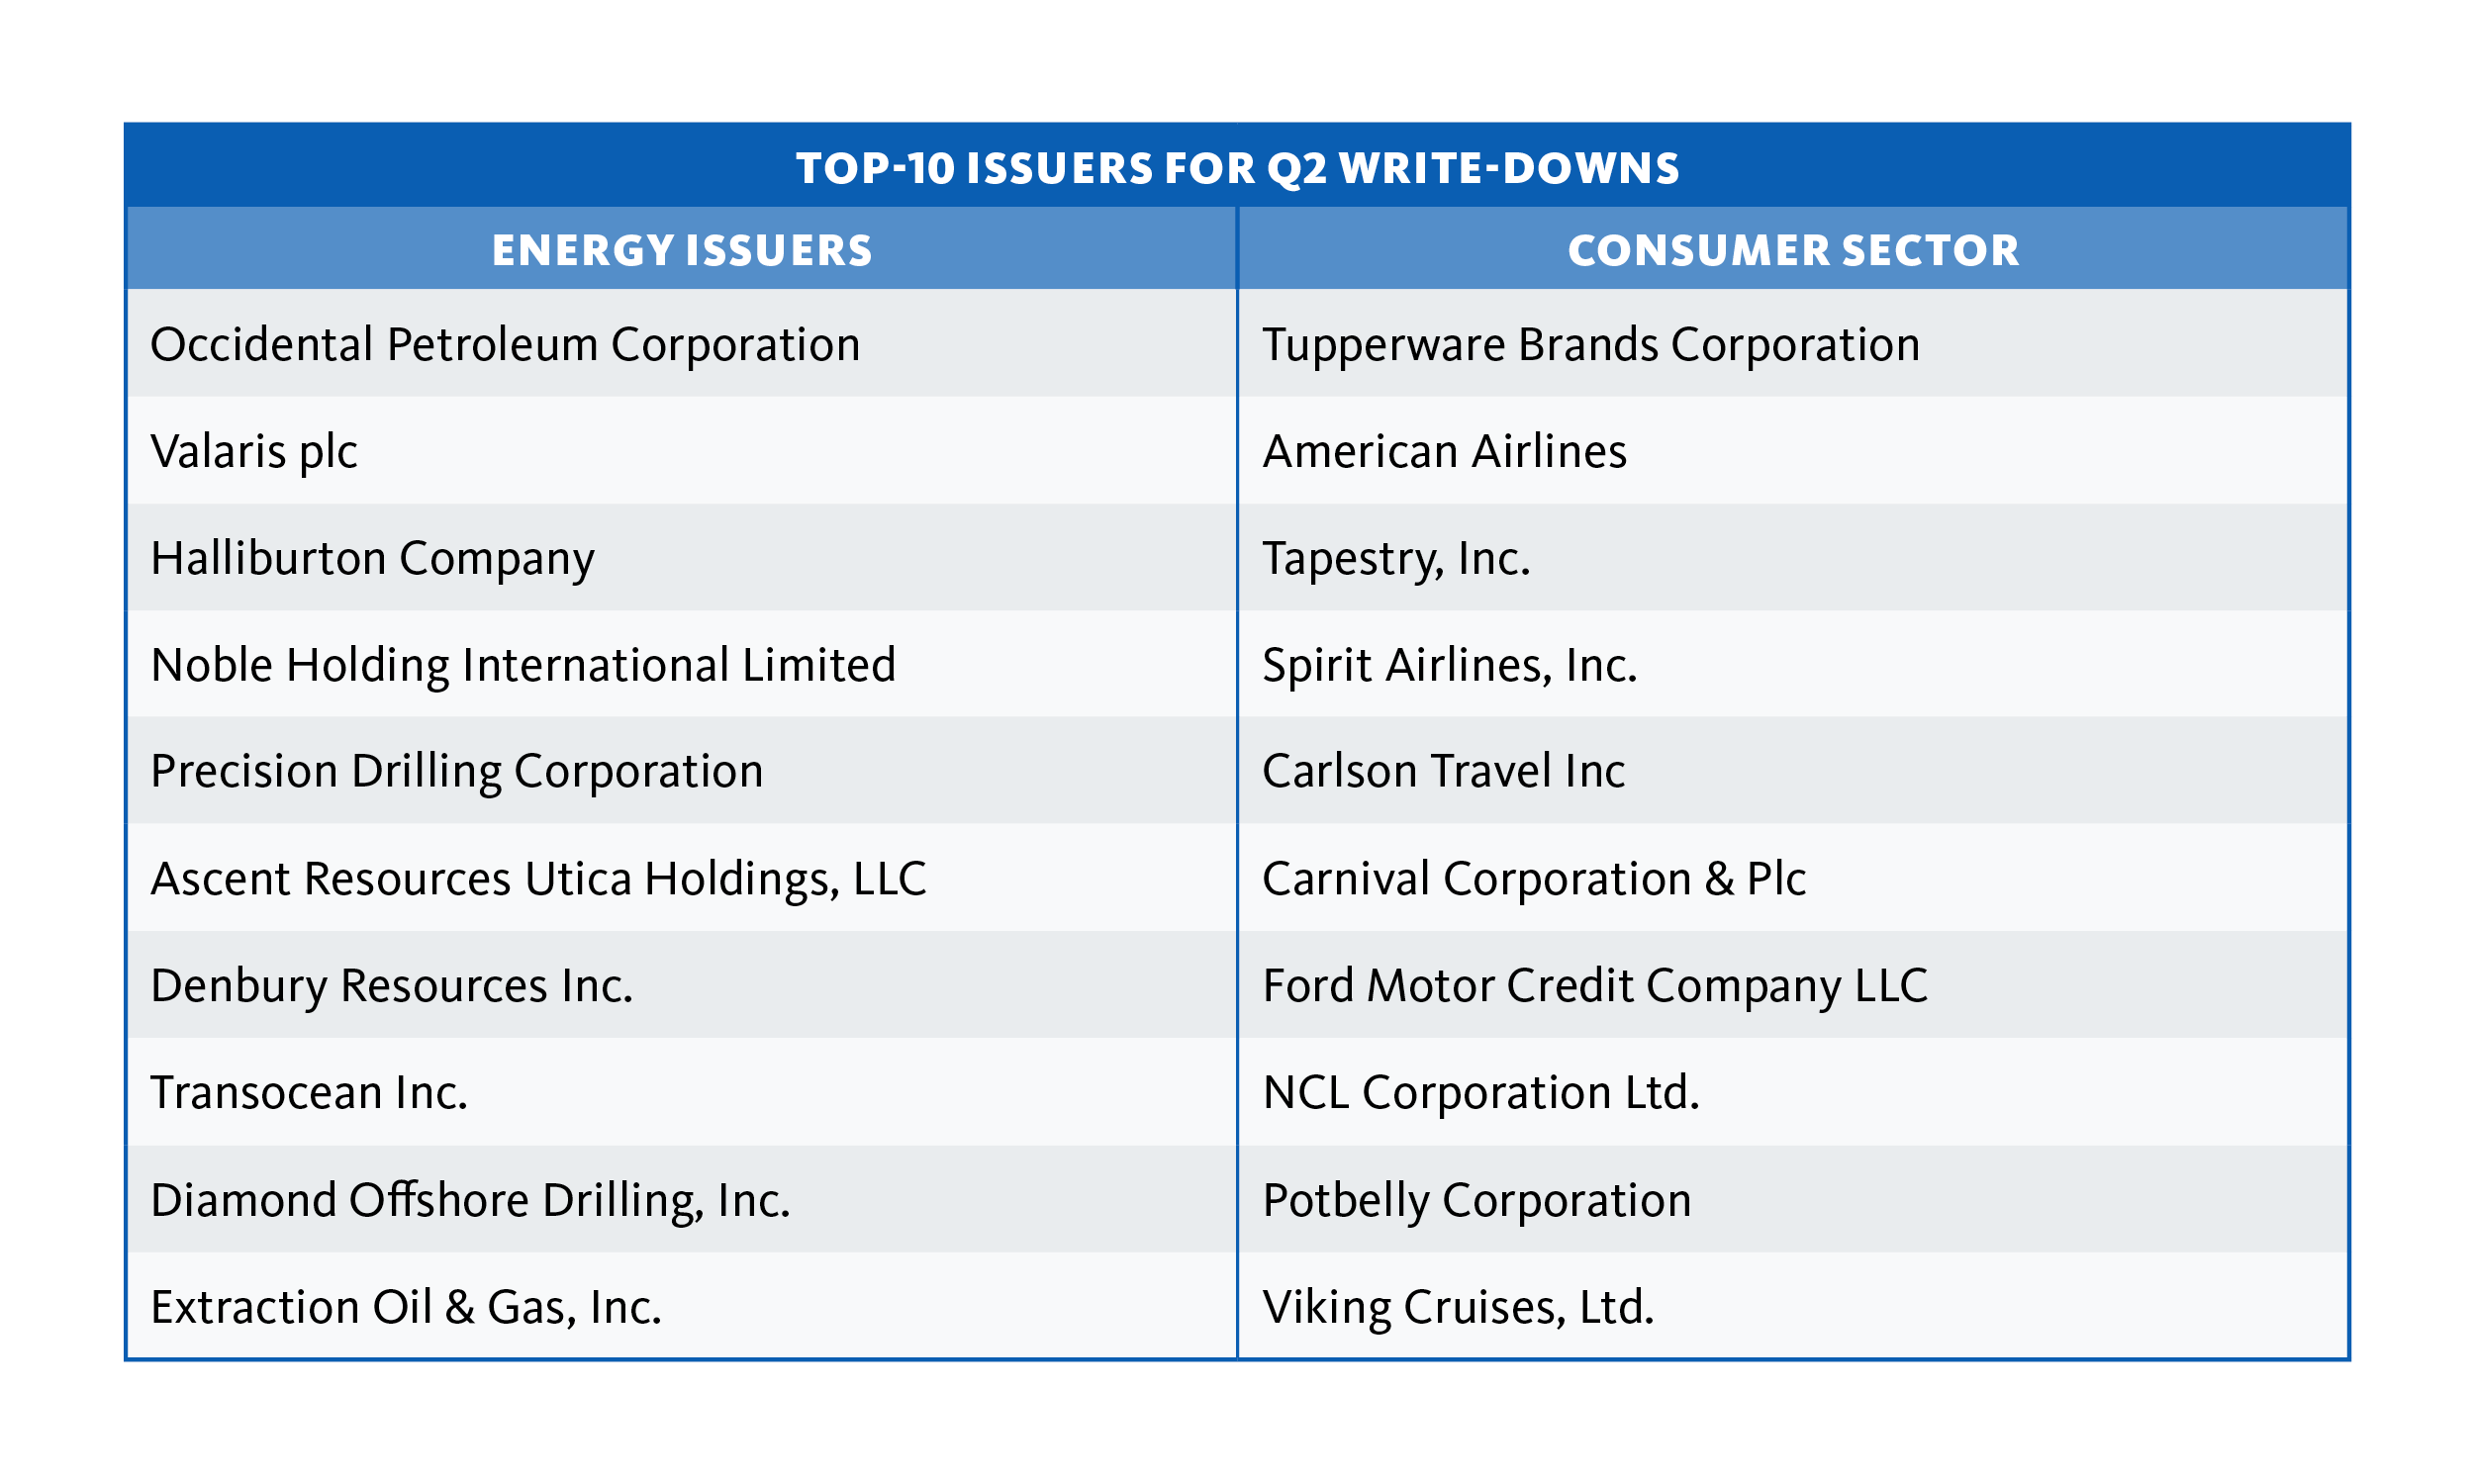 Top 10 issuers for Q2 Write-downs